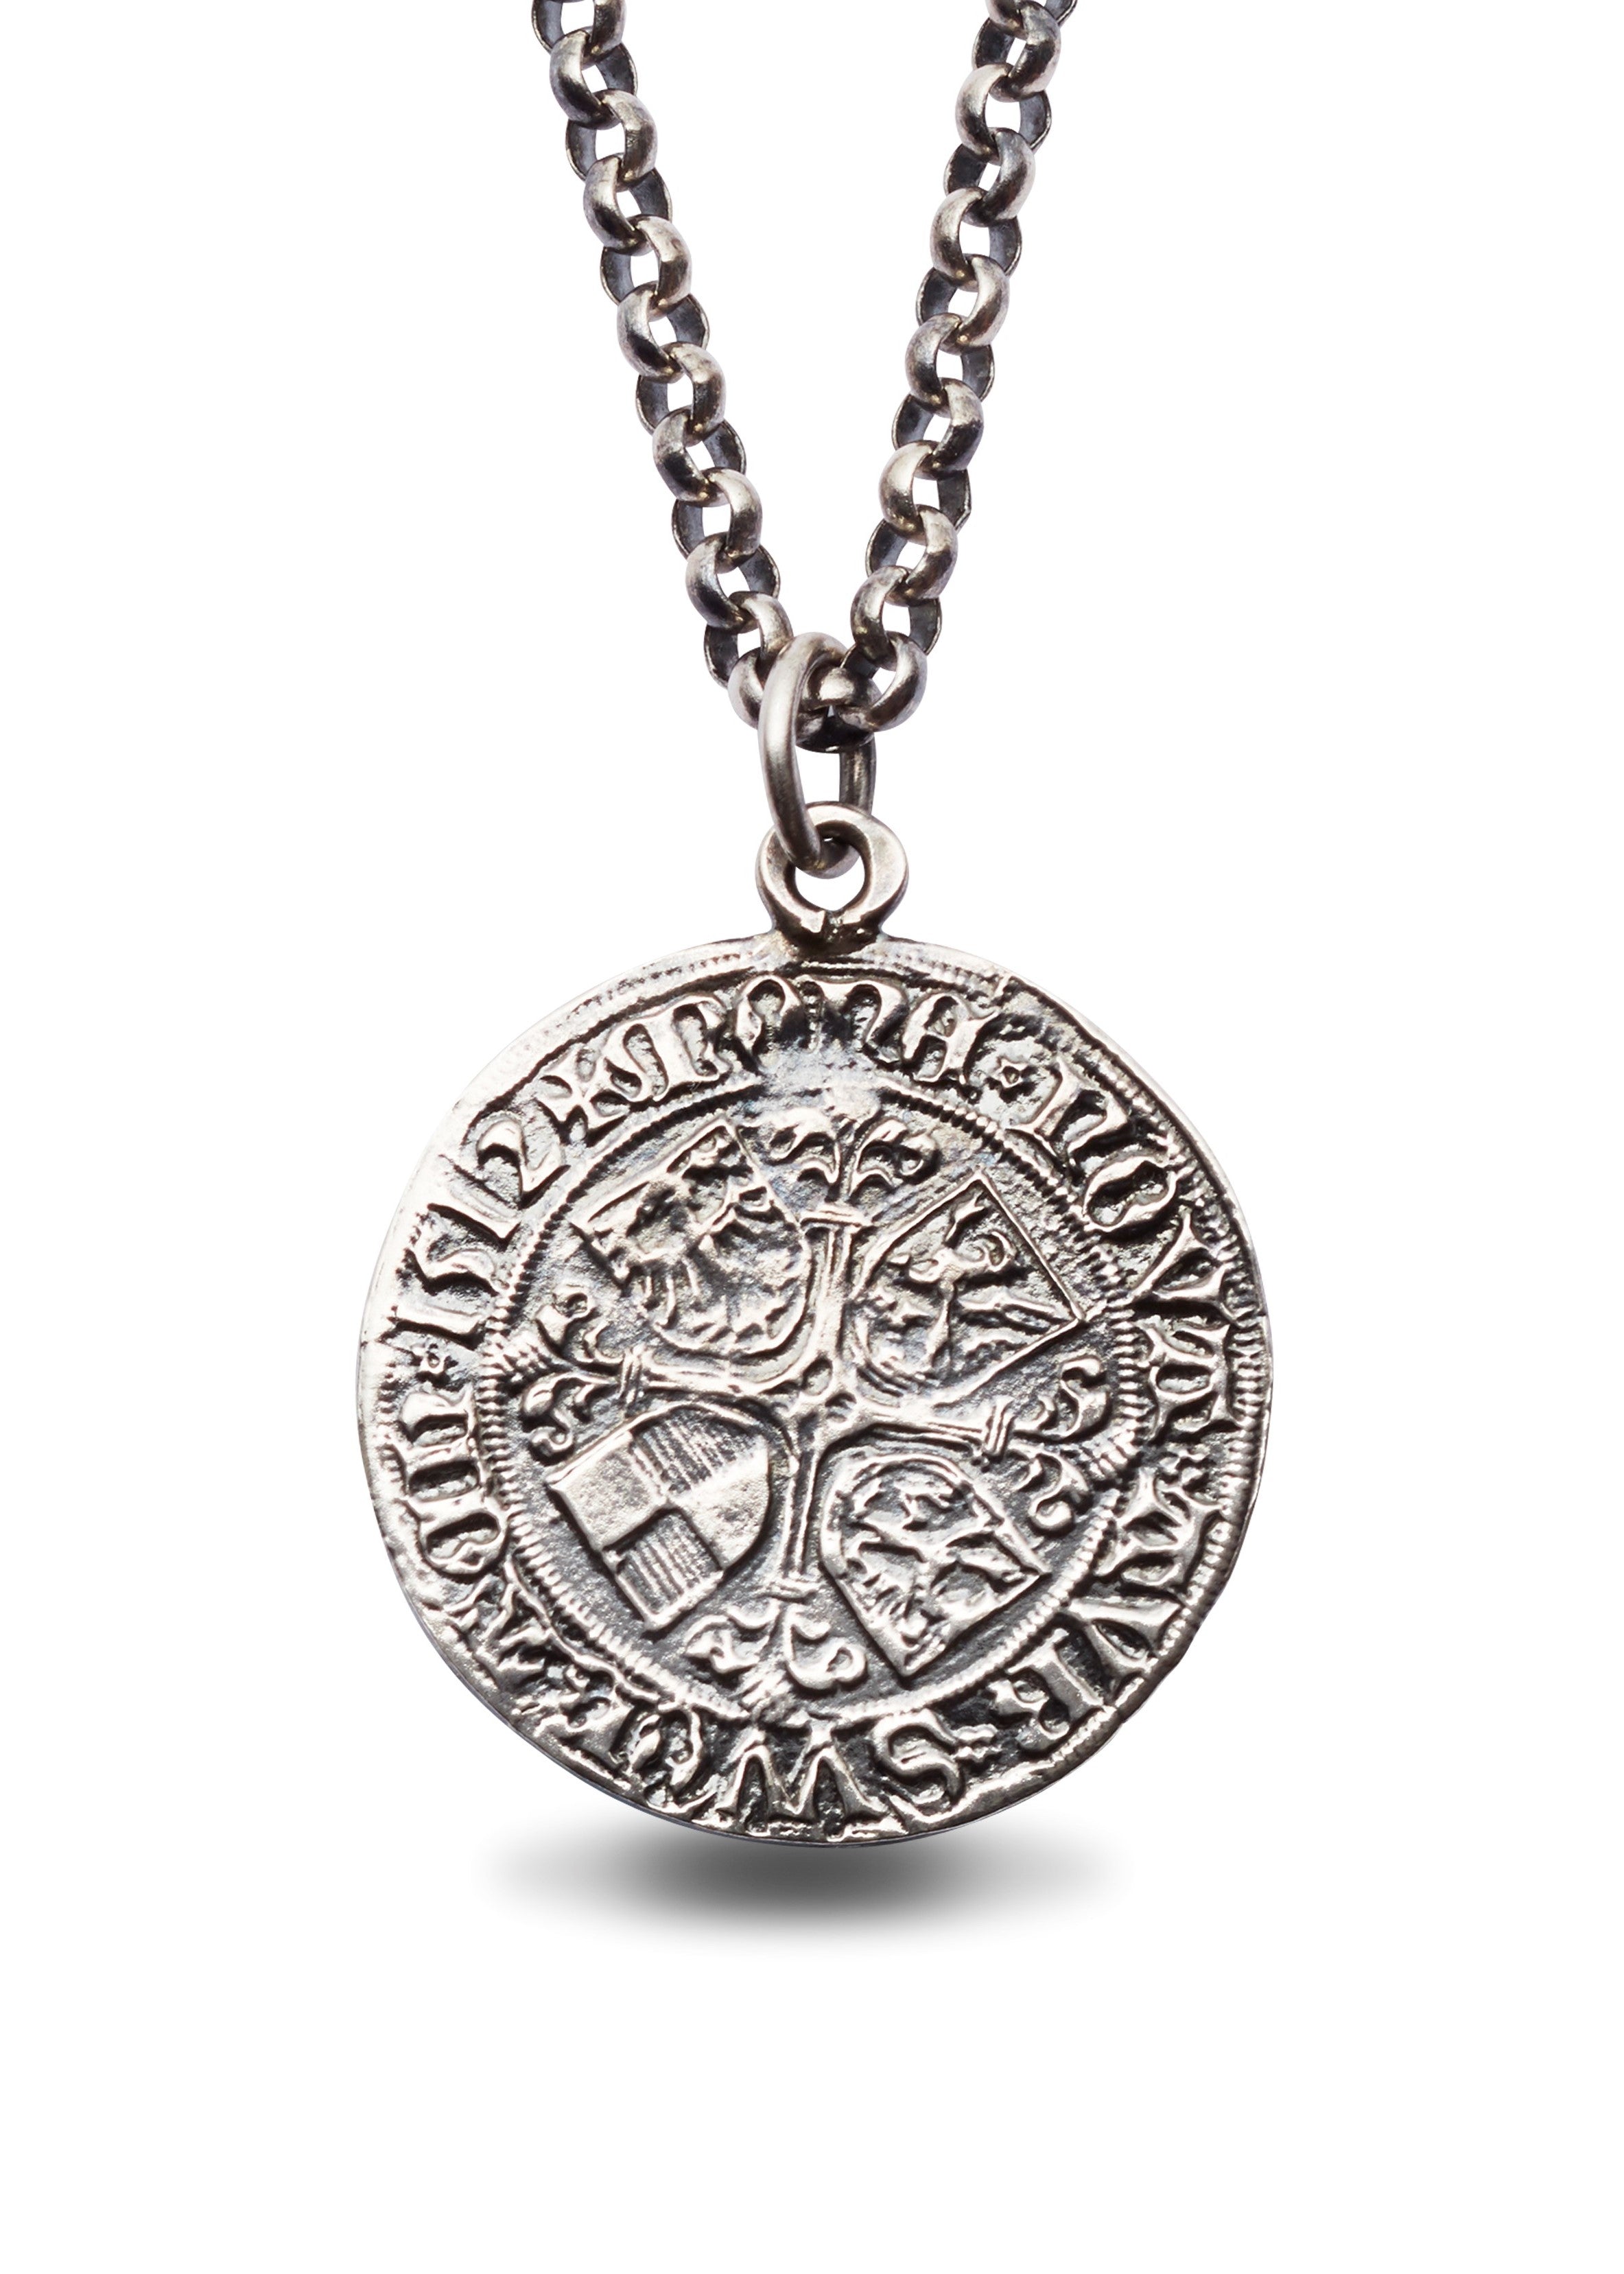 Bryggen coin pendant in oxidized silver with chain